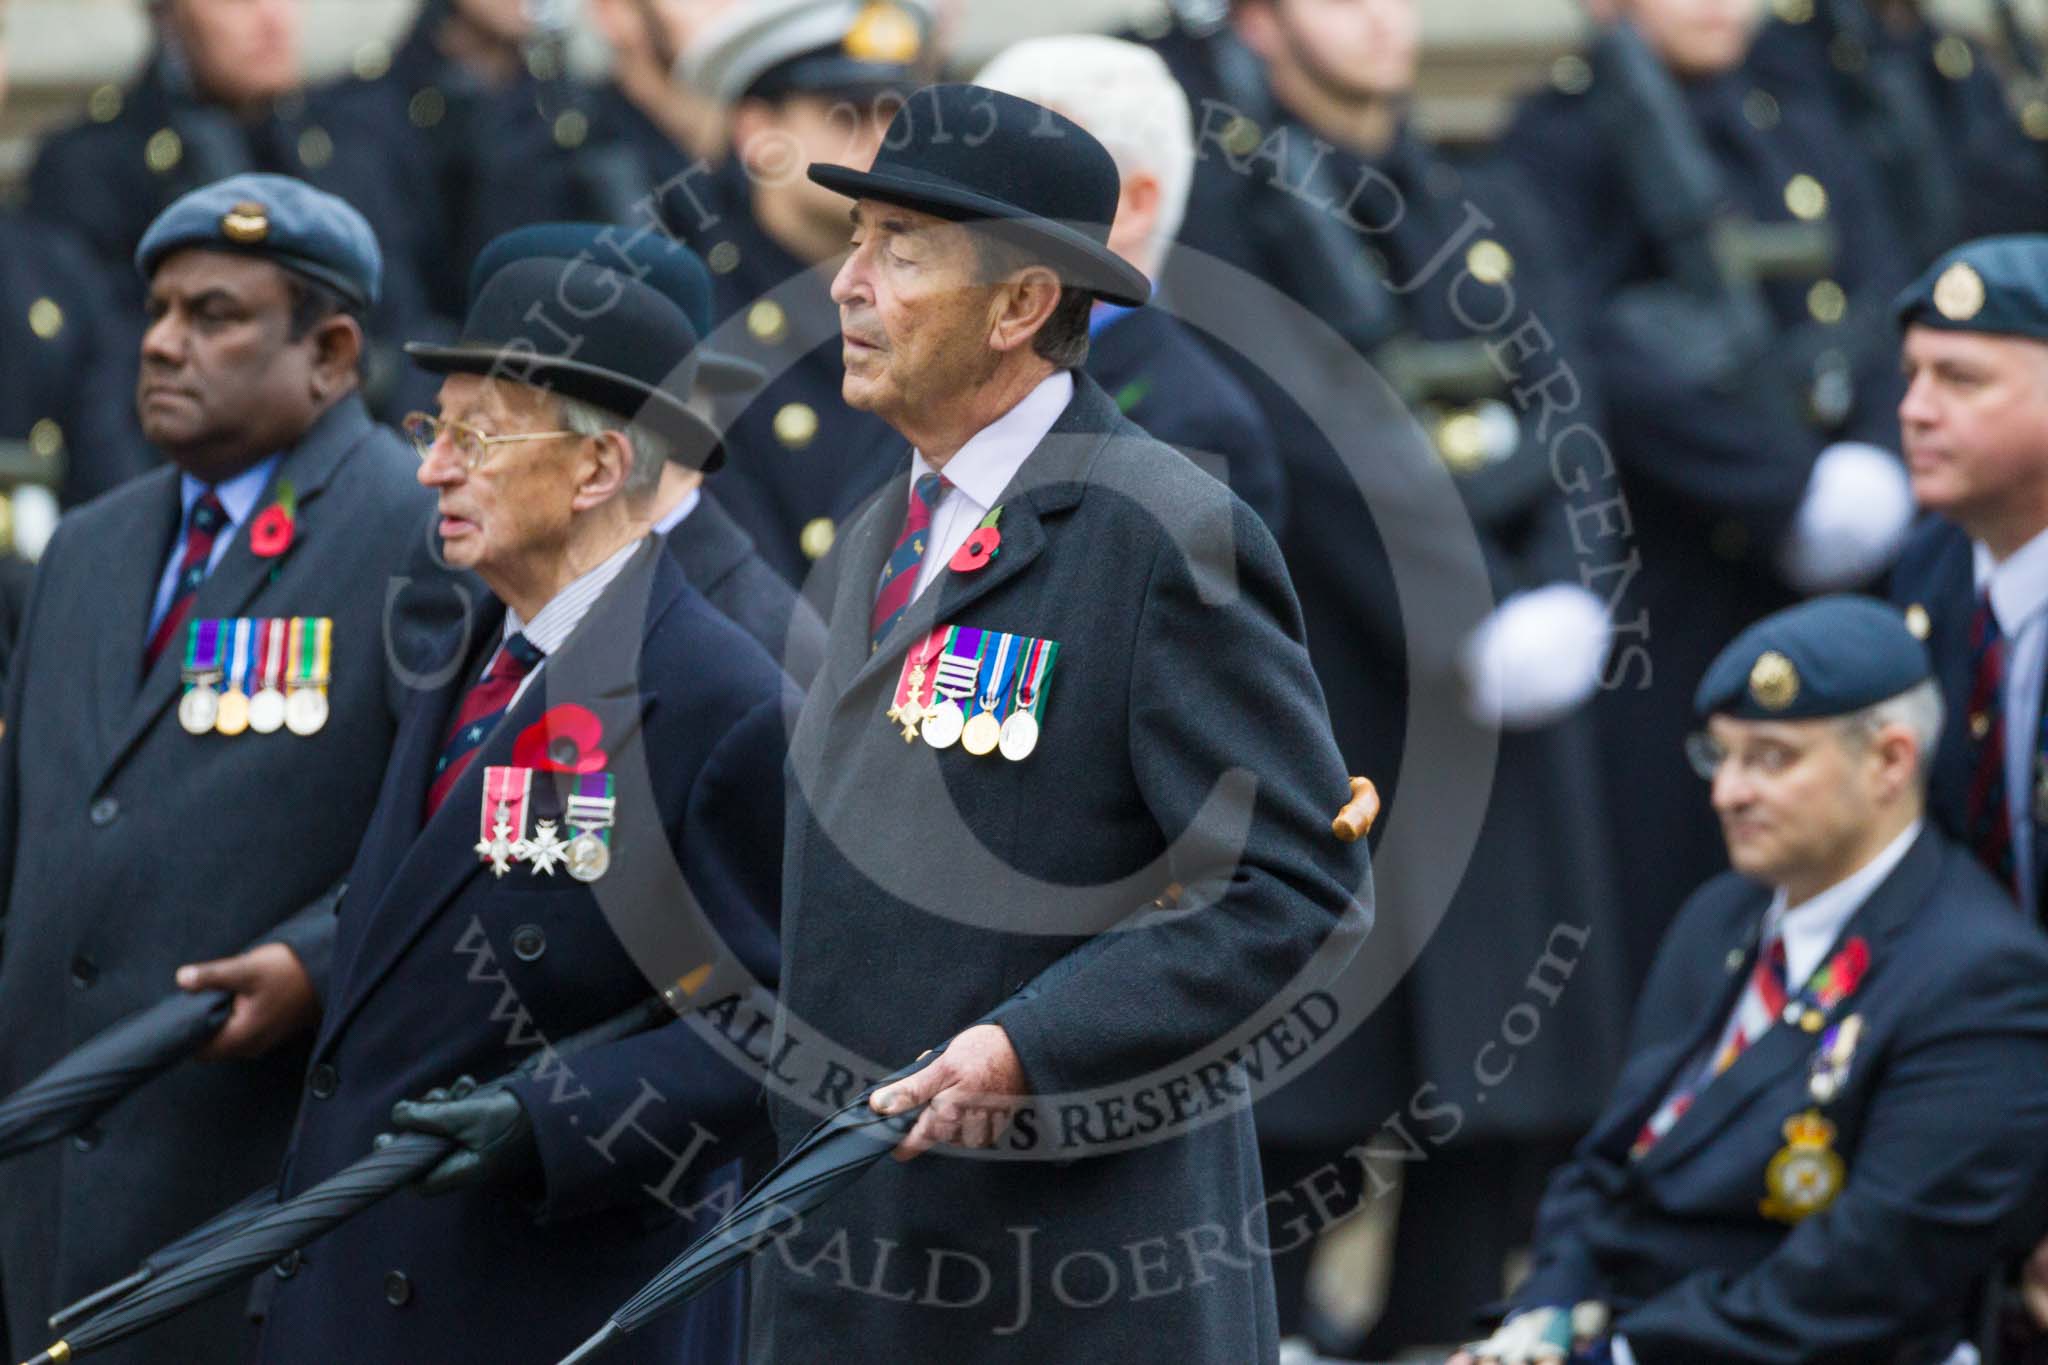 Remembrance Sunday at the Cenotaph 2015: C2, Royal Air Force Regiment Association.
Cenotaph, Whitehall, London SW1,
London,
Greater London,
United Kingdom,
on 08 November 2015 at 11:47, image #412